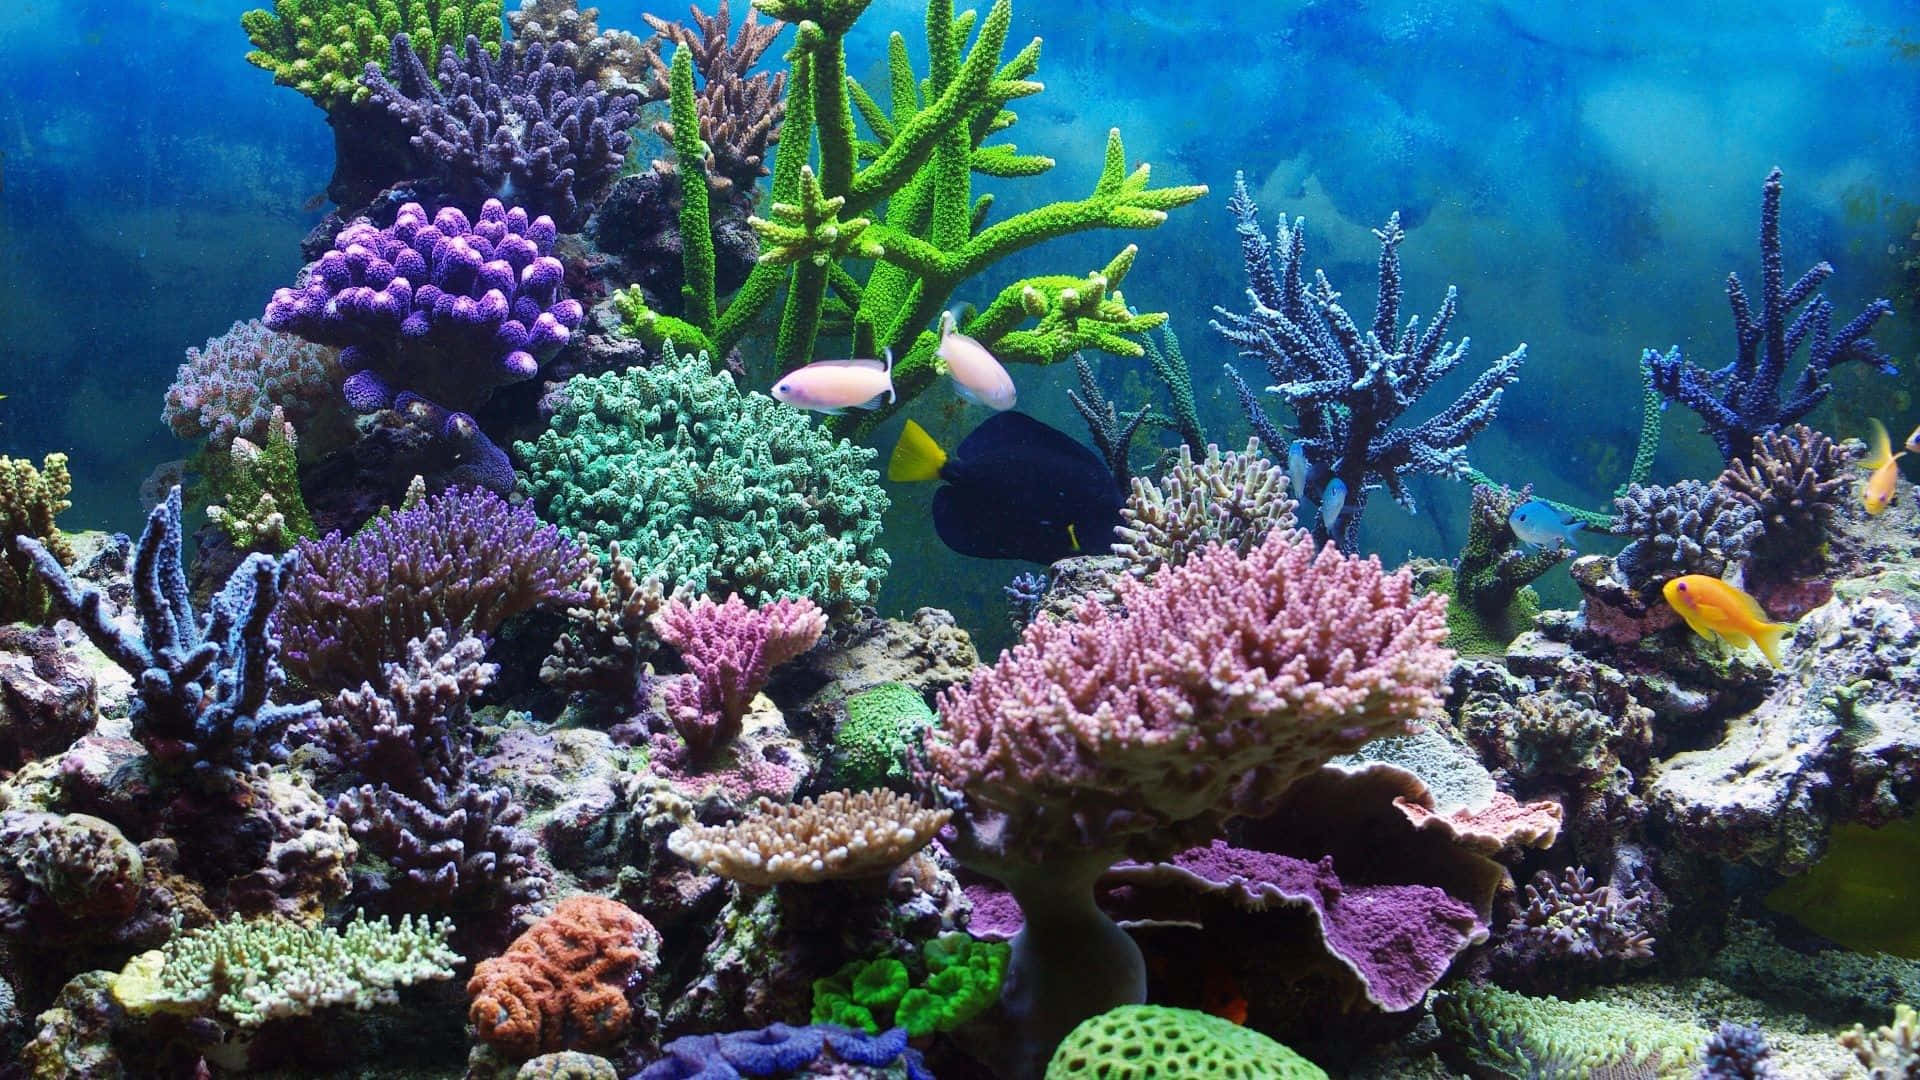 A Vibrant Coral Reef Teeming with Life